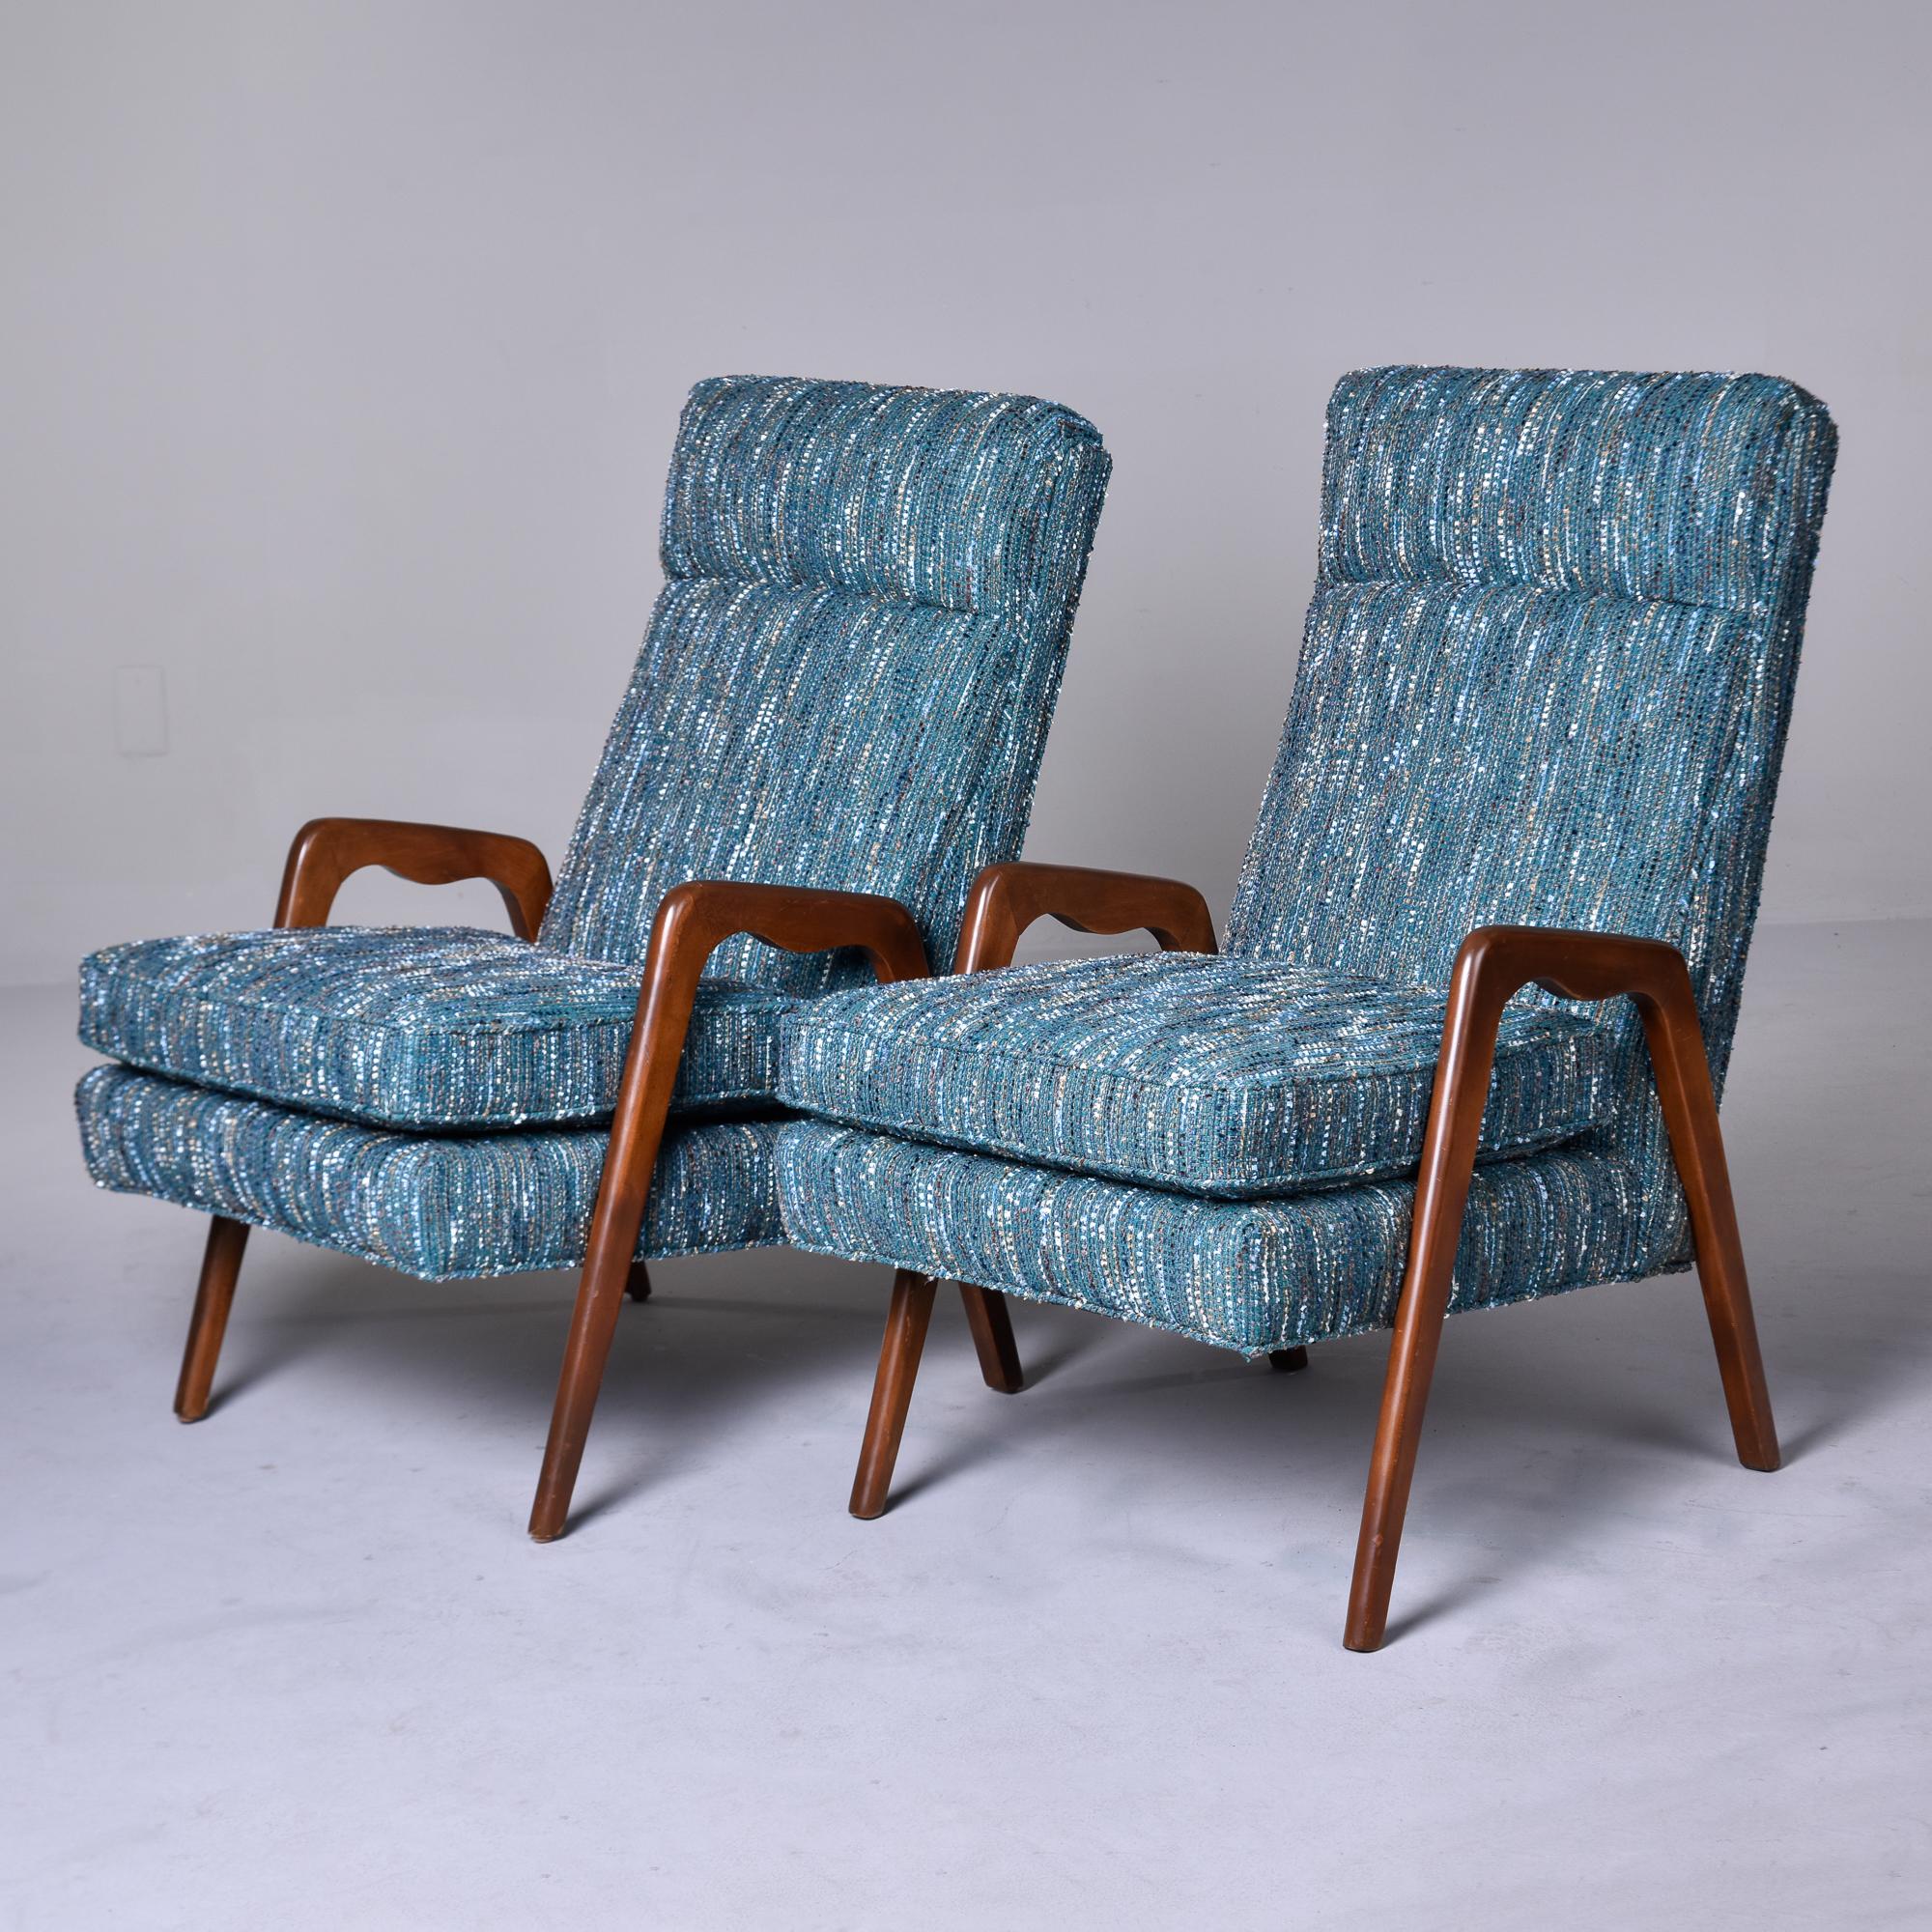 Found in Italy, this pair of circa late 1950s/early 1960s arm chairs have sleek, tapered dark stained wood arms and legs. Tall, slanted seat backs have a seamed headrest. Chairs are newly upholstered in a nubby teal blue cotton blend woven tweed